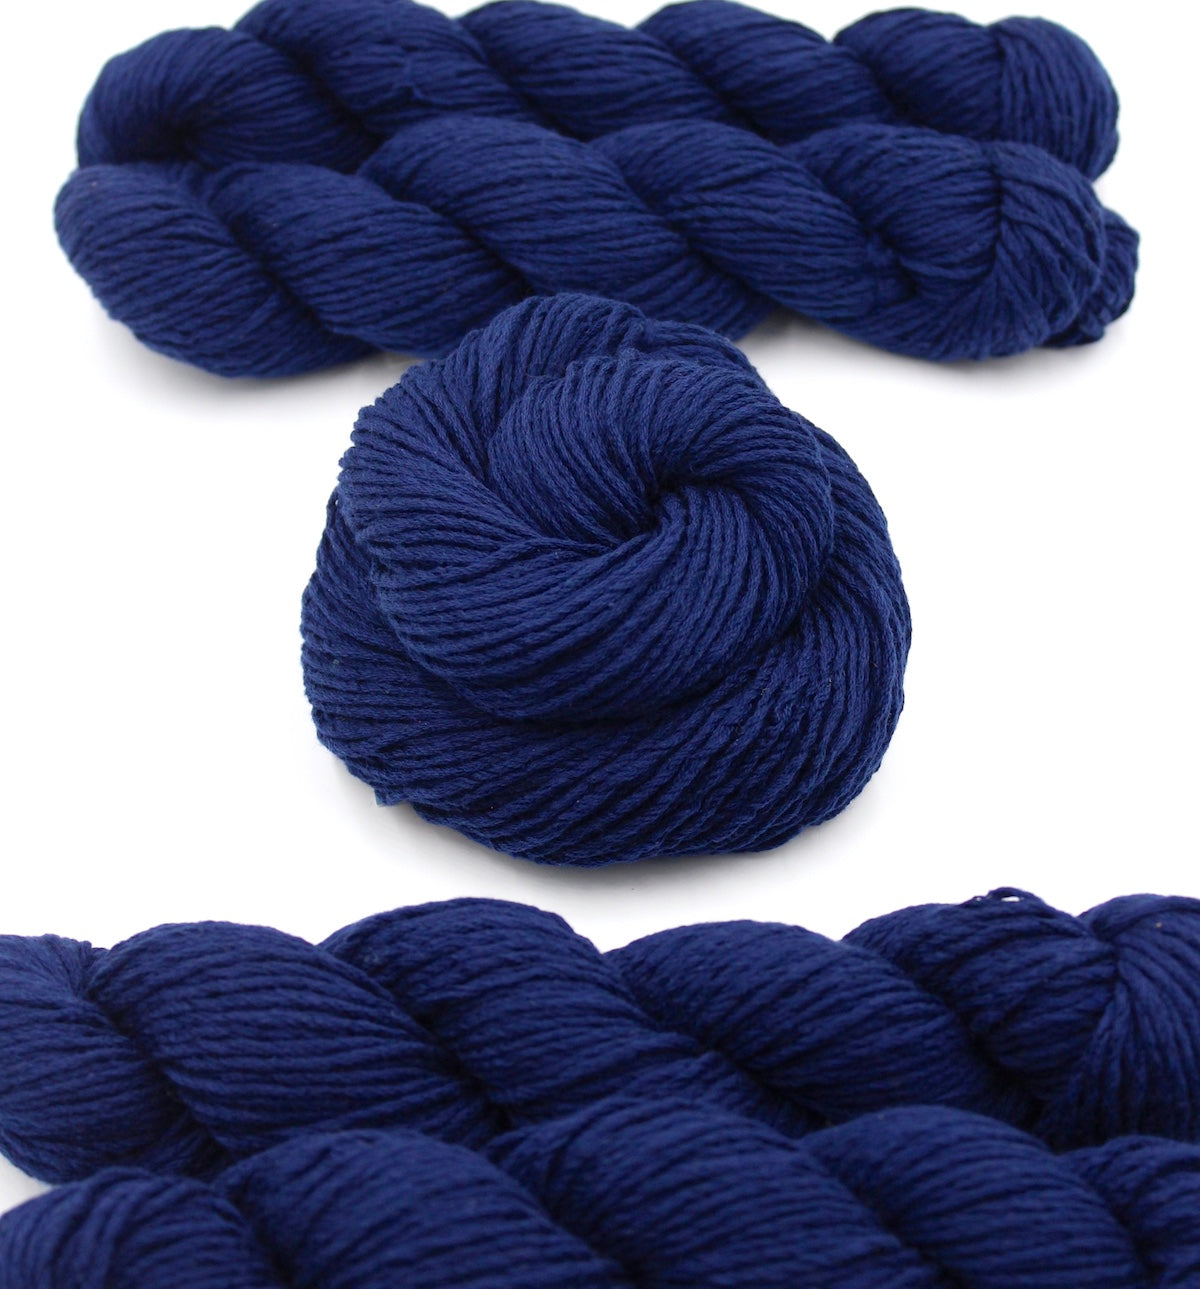 Several skeins of Vegan, Sailor Navy Blue, Cotton/ Polyester/ Acrylic, Dk weight recycled by hand from unwanted sweaters stacked on top of each other attractively. 